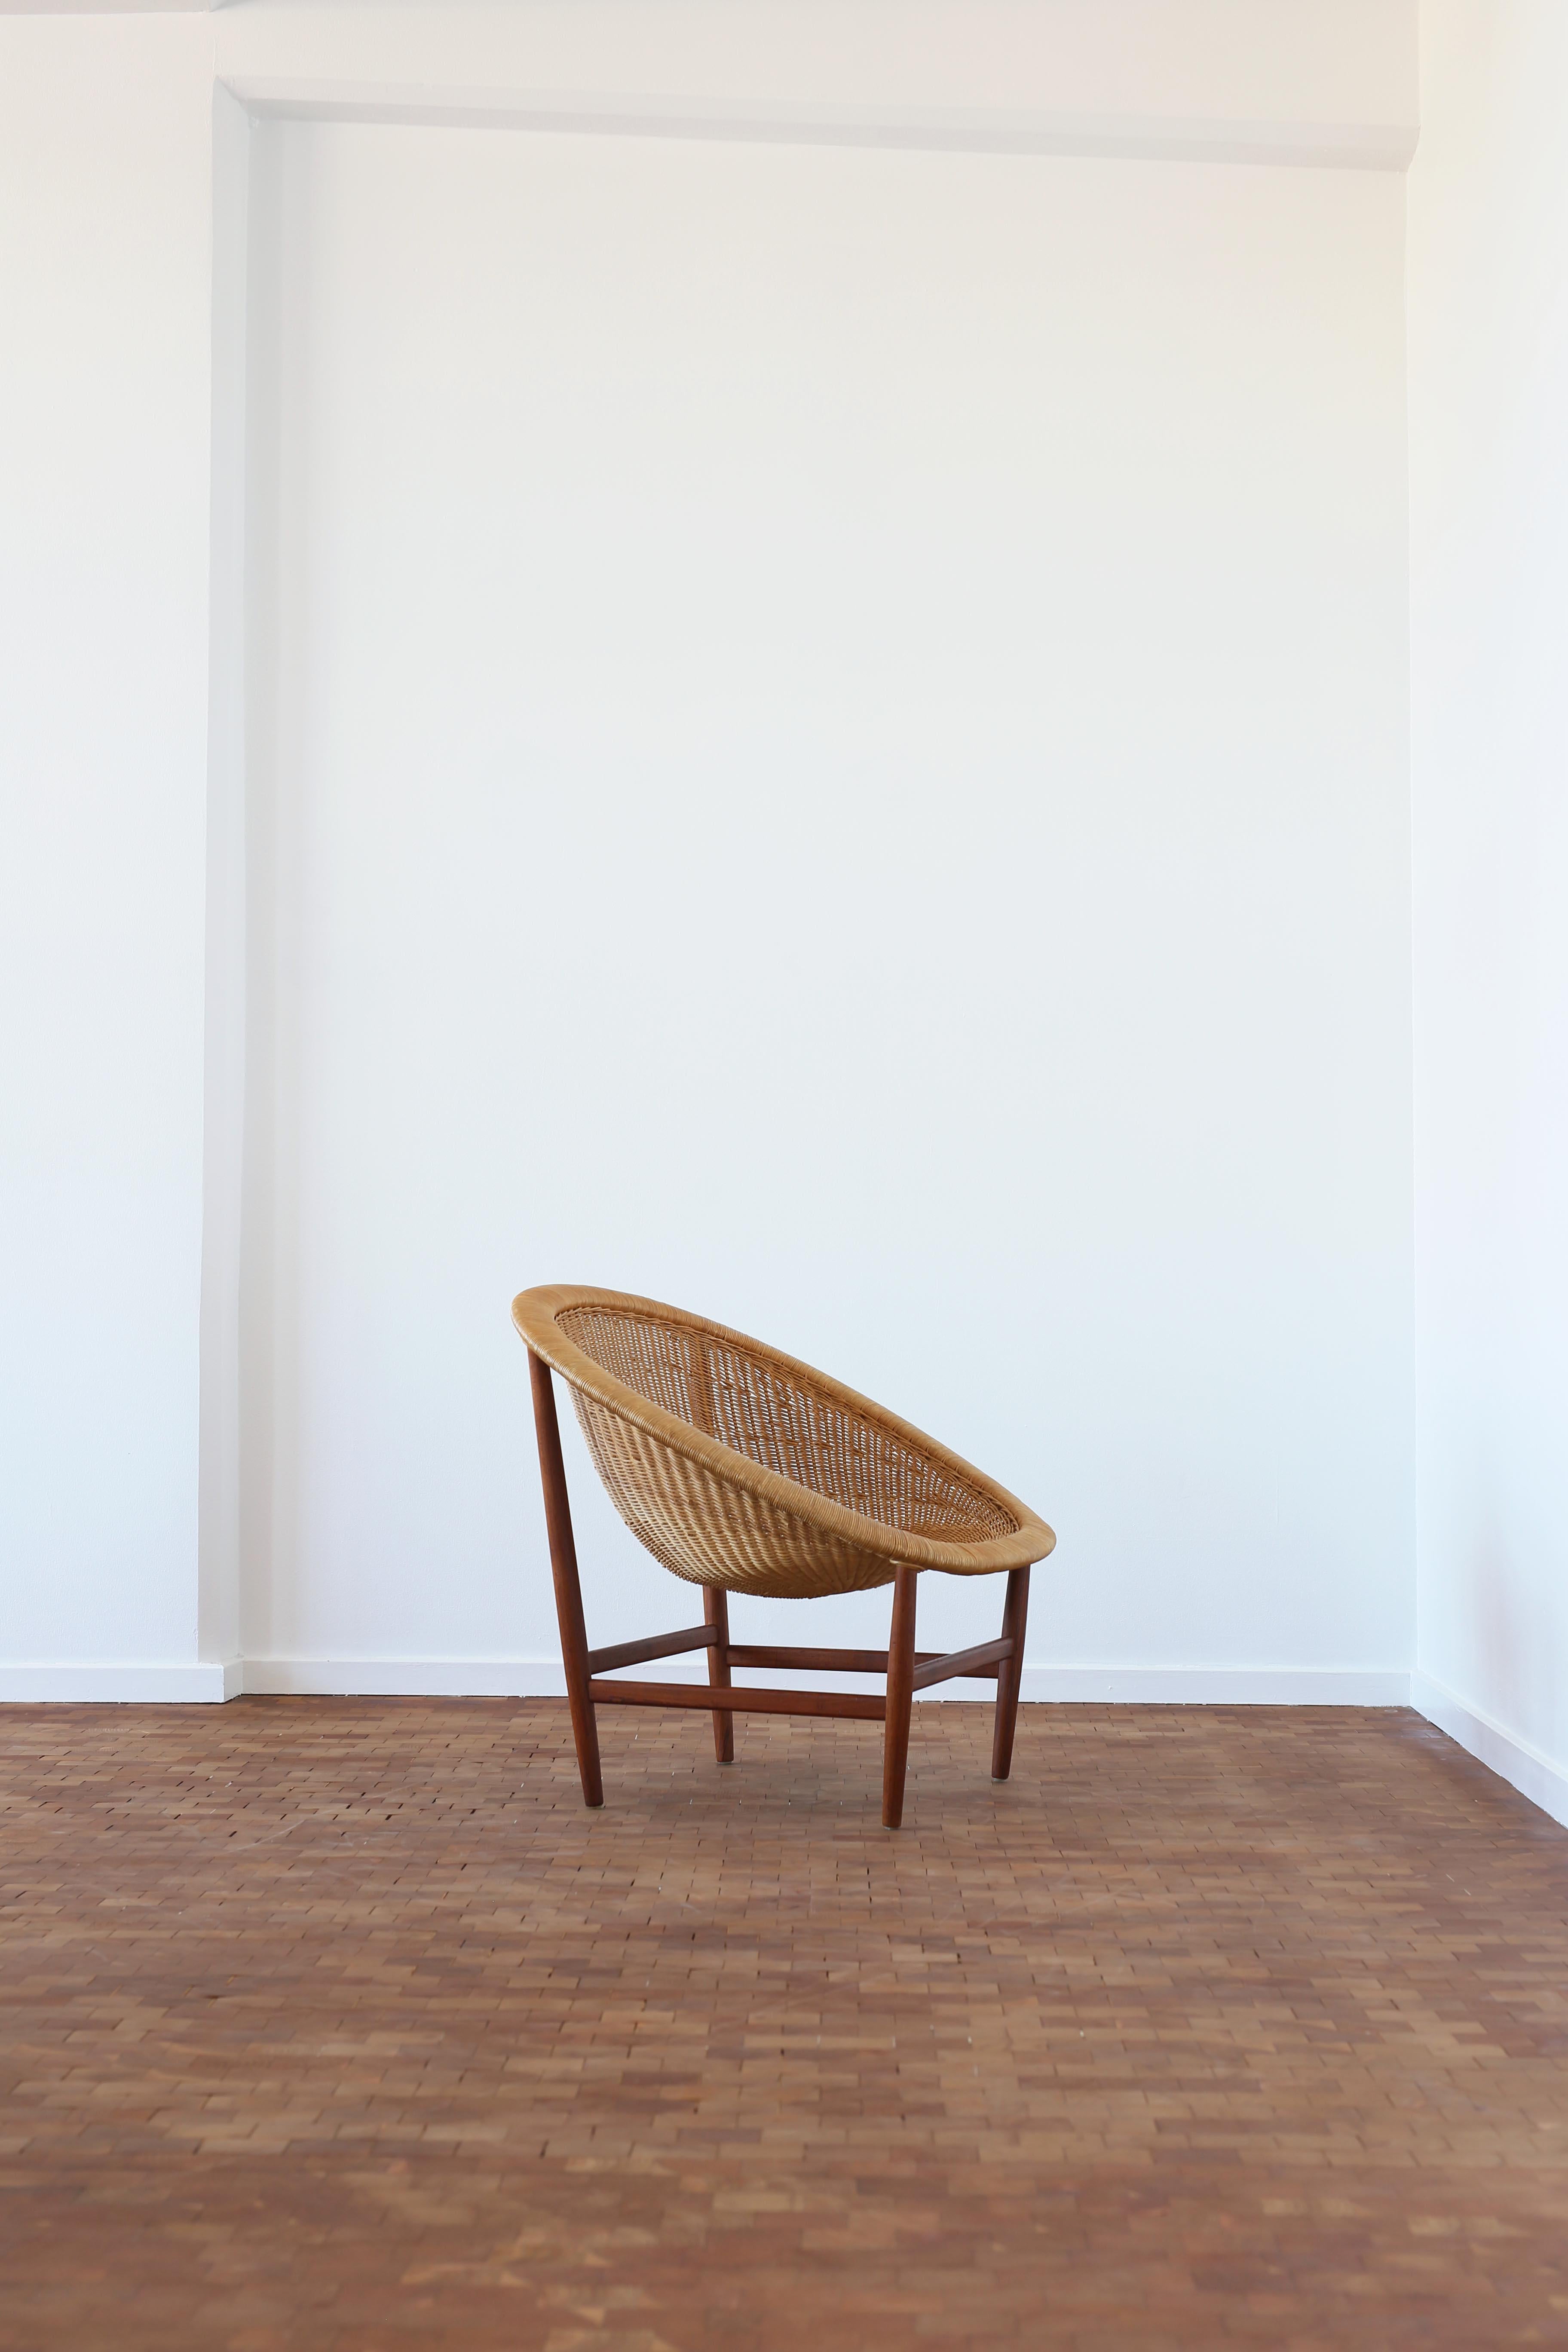 First edition Nanna Ditzel 'Basket' easy chair with frame of teak, upholstered with wicker.  Designed by Nanna Ditzel for Ludvig Pontoppidan, Denmark, 1950's with makers mark. 

Very fine original condition. 